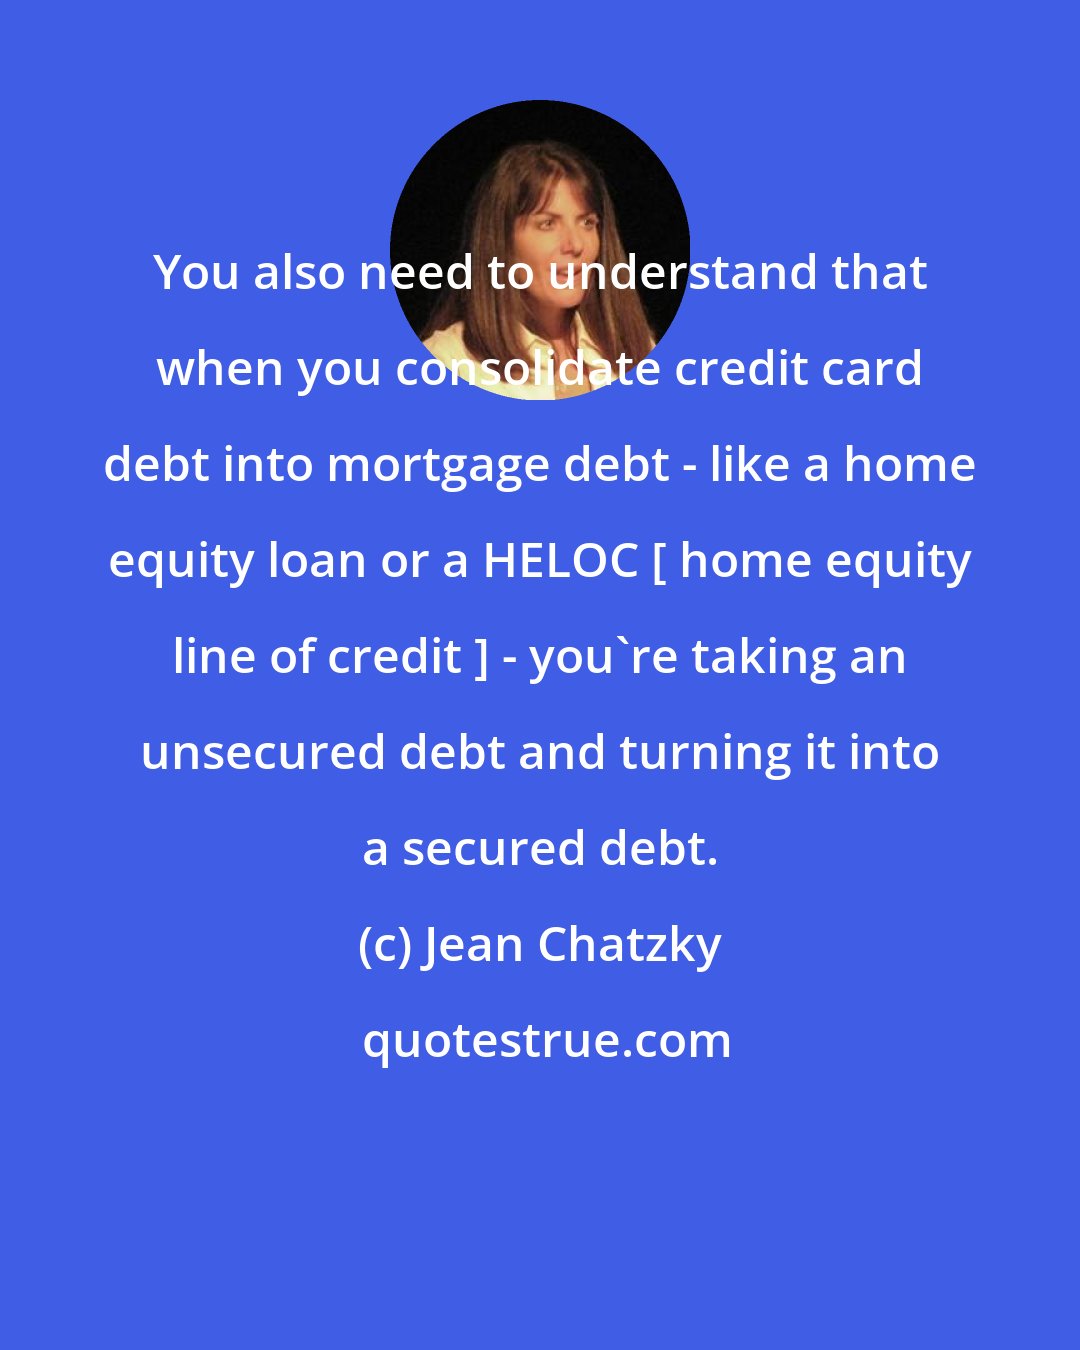 Jean Chatzky: You also need to understand that when you consolidate credit card debt into mortgage debt - like a home equity loan or a HELOC [ home equity line of credit ] - you're taking an unsecured debt and turning it into a secured debt.